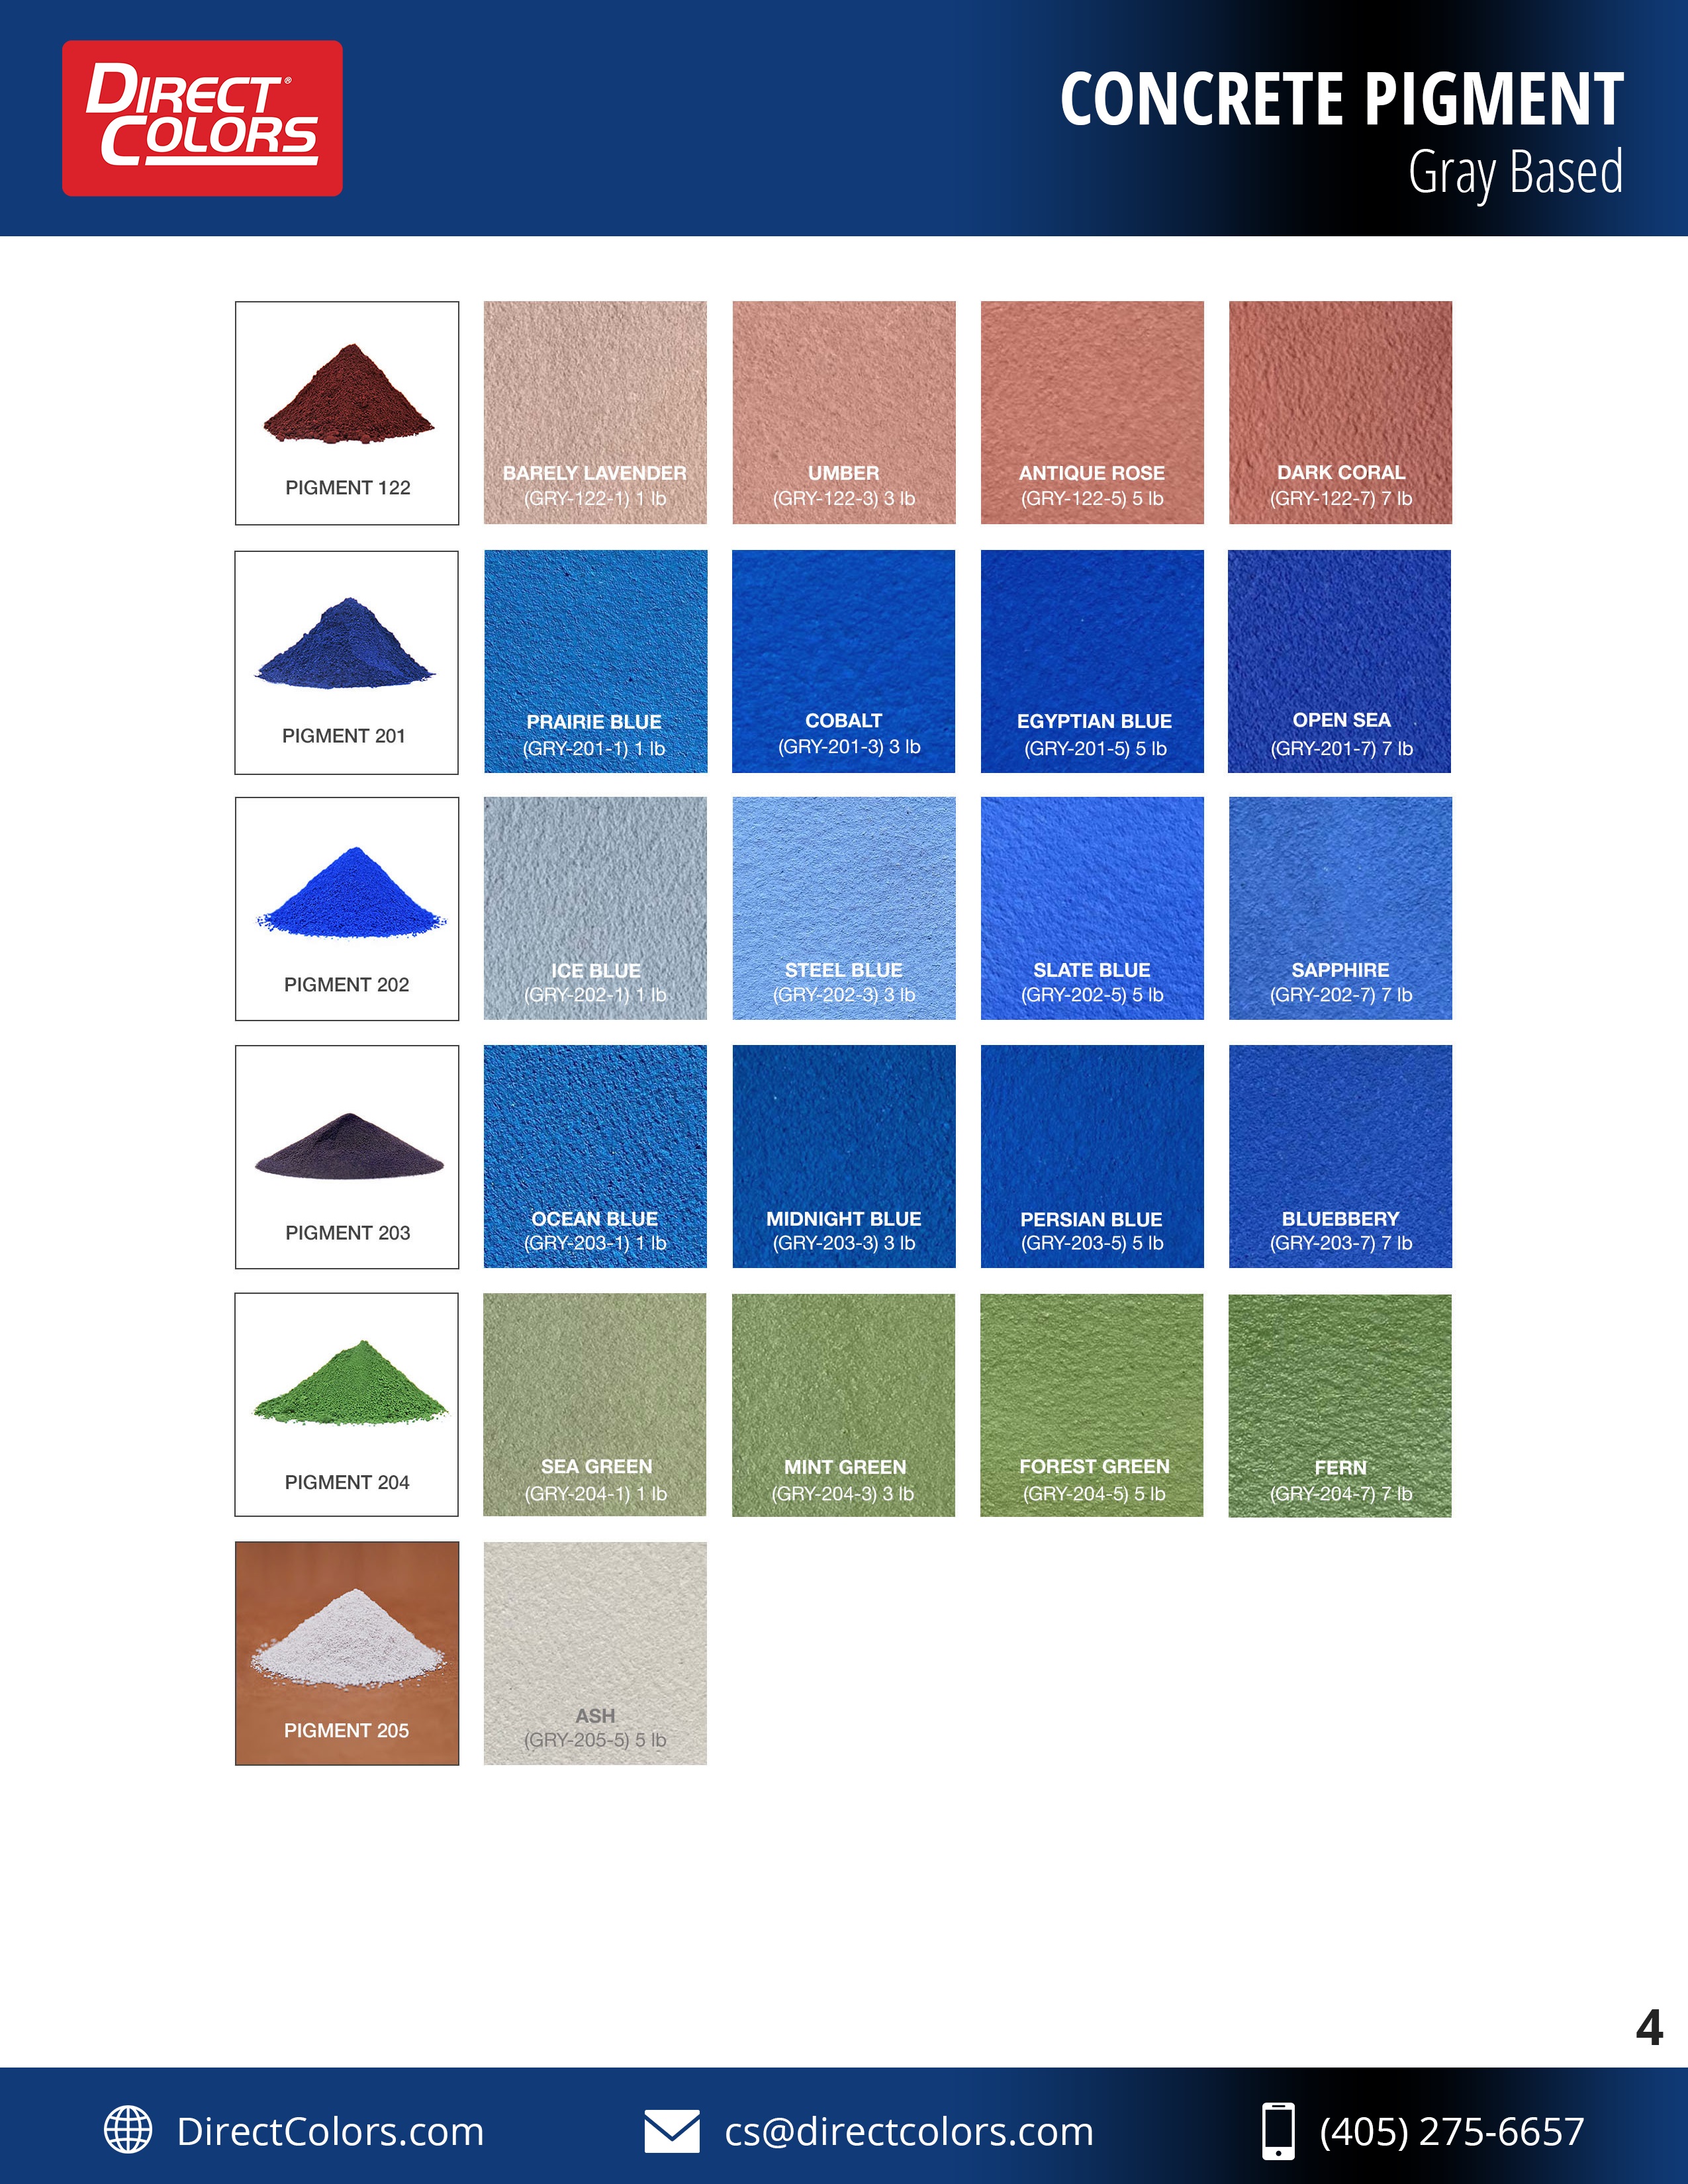 GRAY-BASED PIGMENTS - COLOR CHART